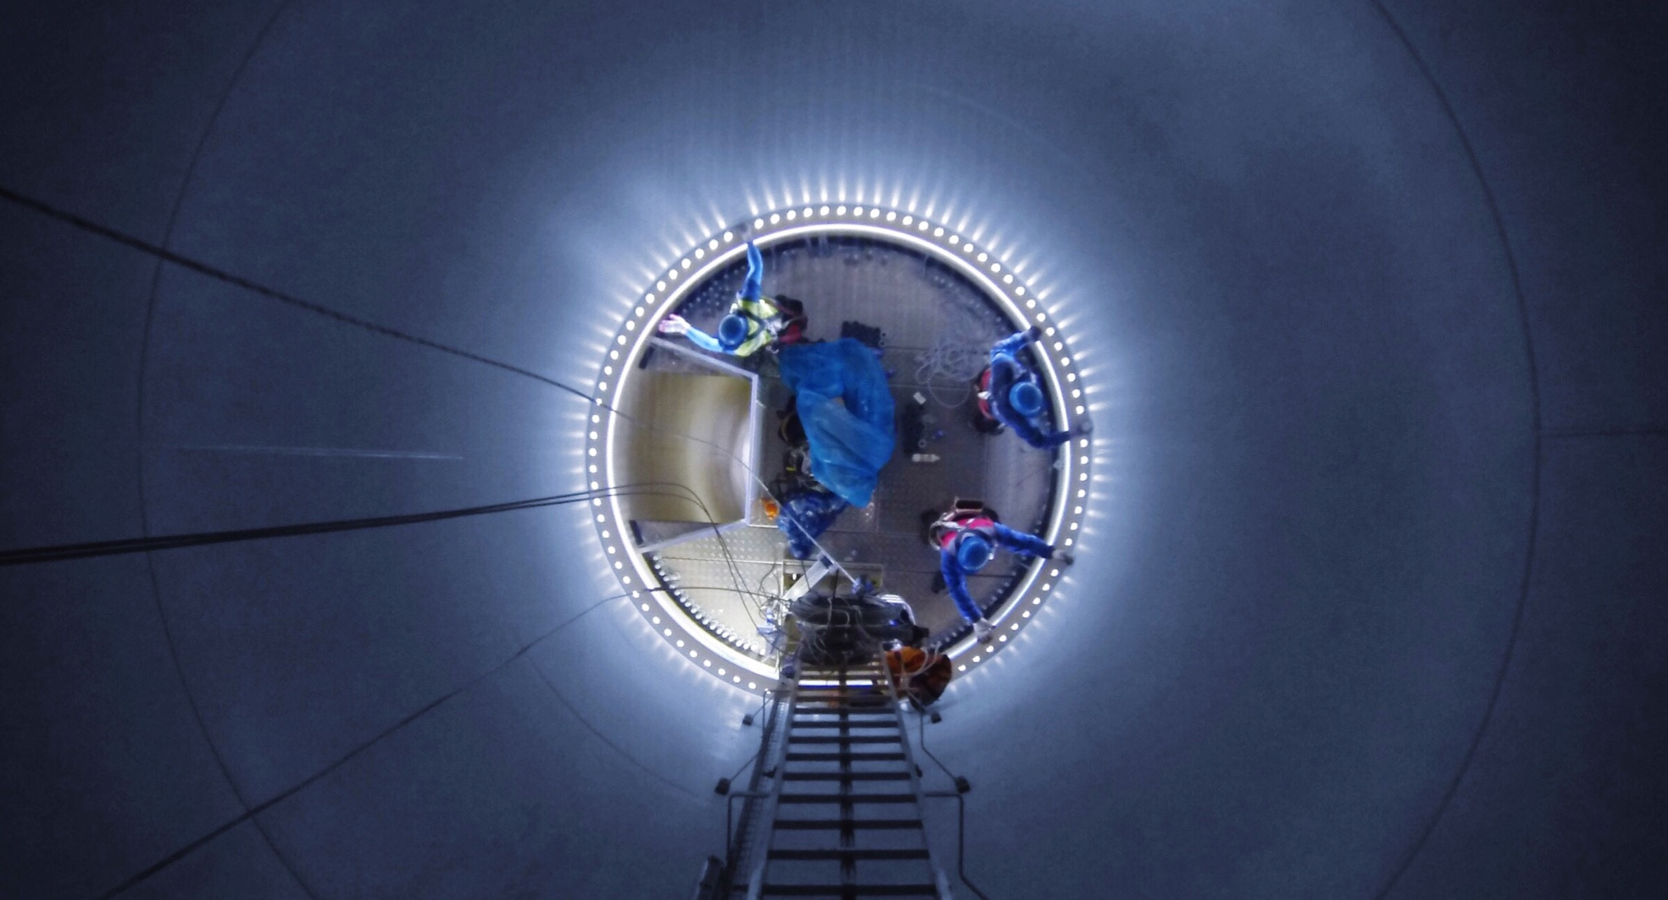 An image taken inside a windmill from above, with several workers on groundlevel working on maintenance. 